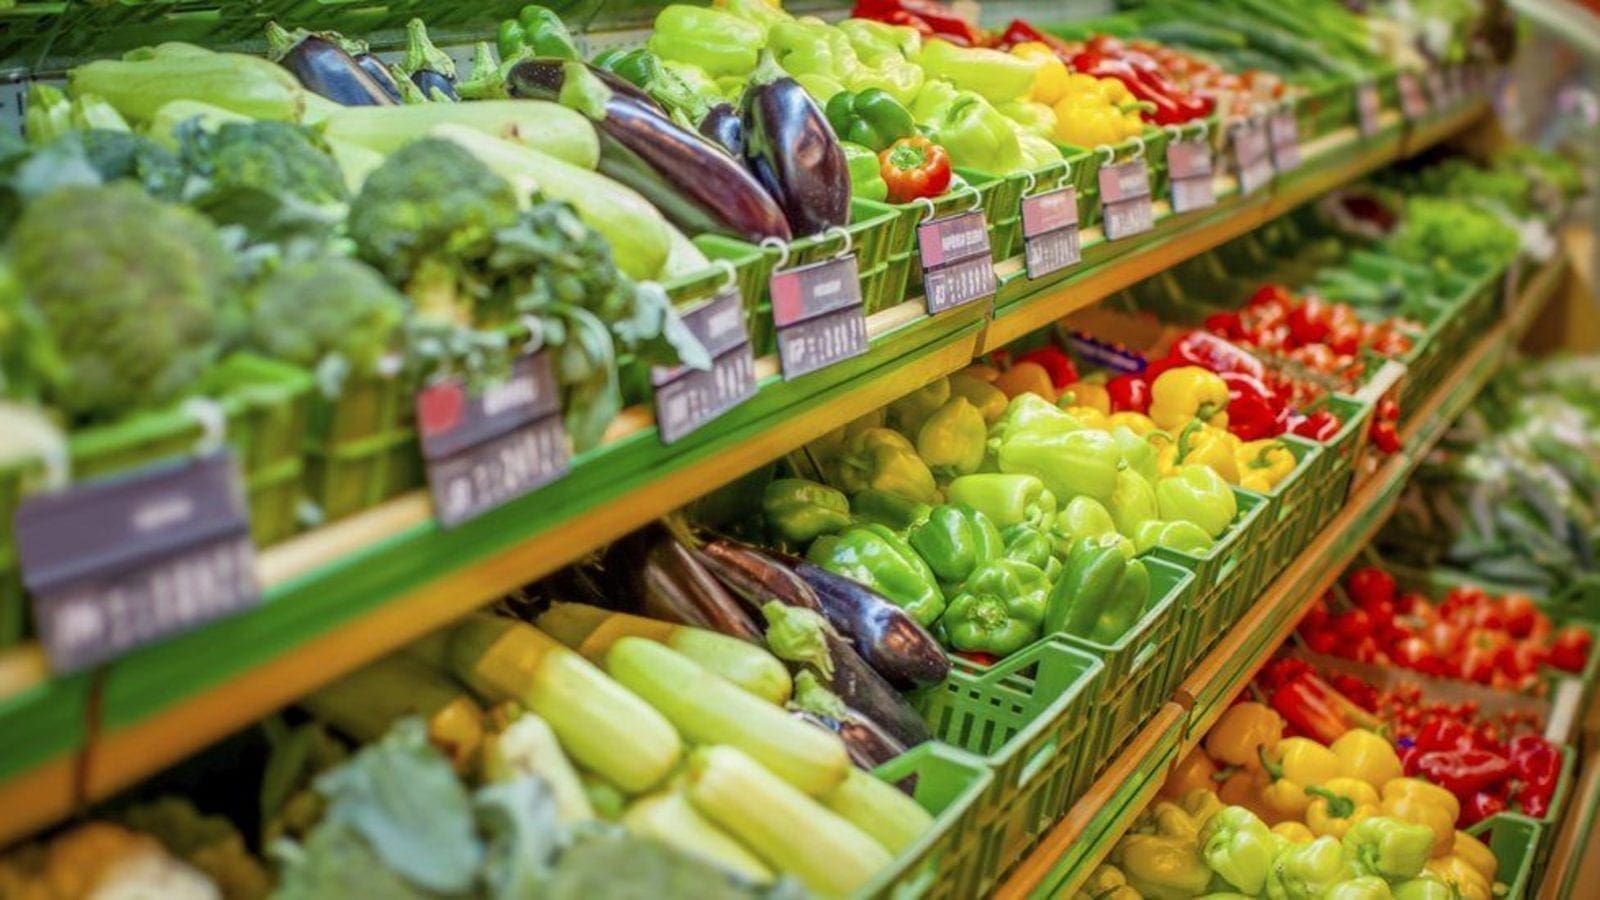 EU launches new guidelines on responsible food business and marketing practices